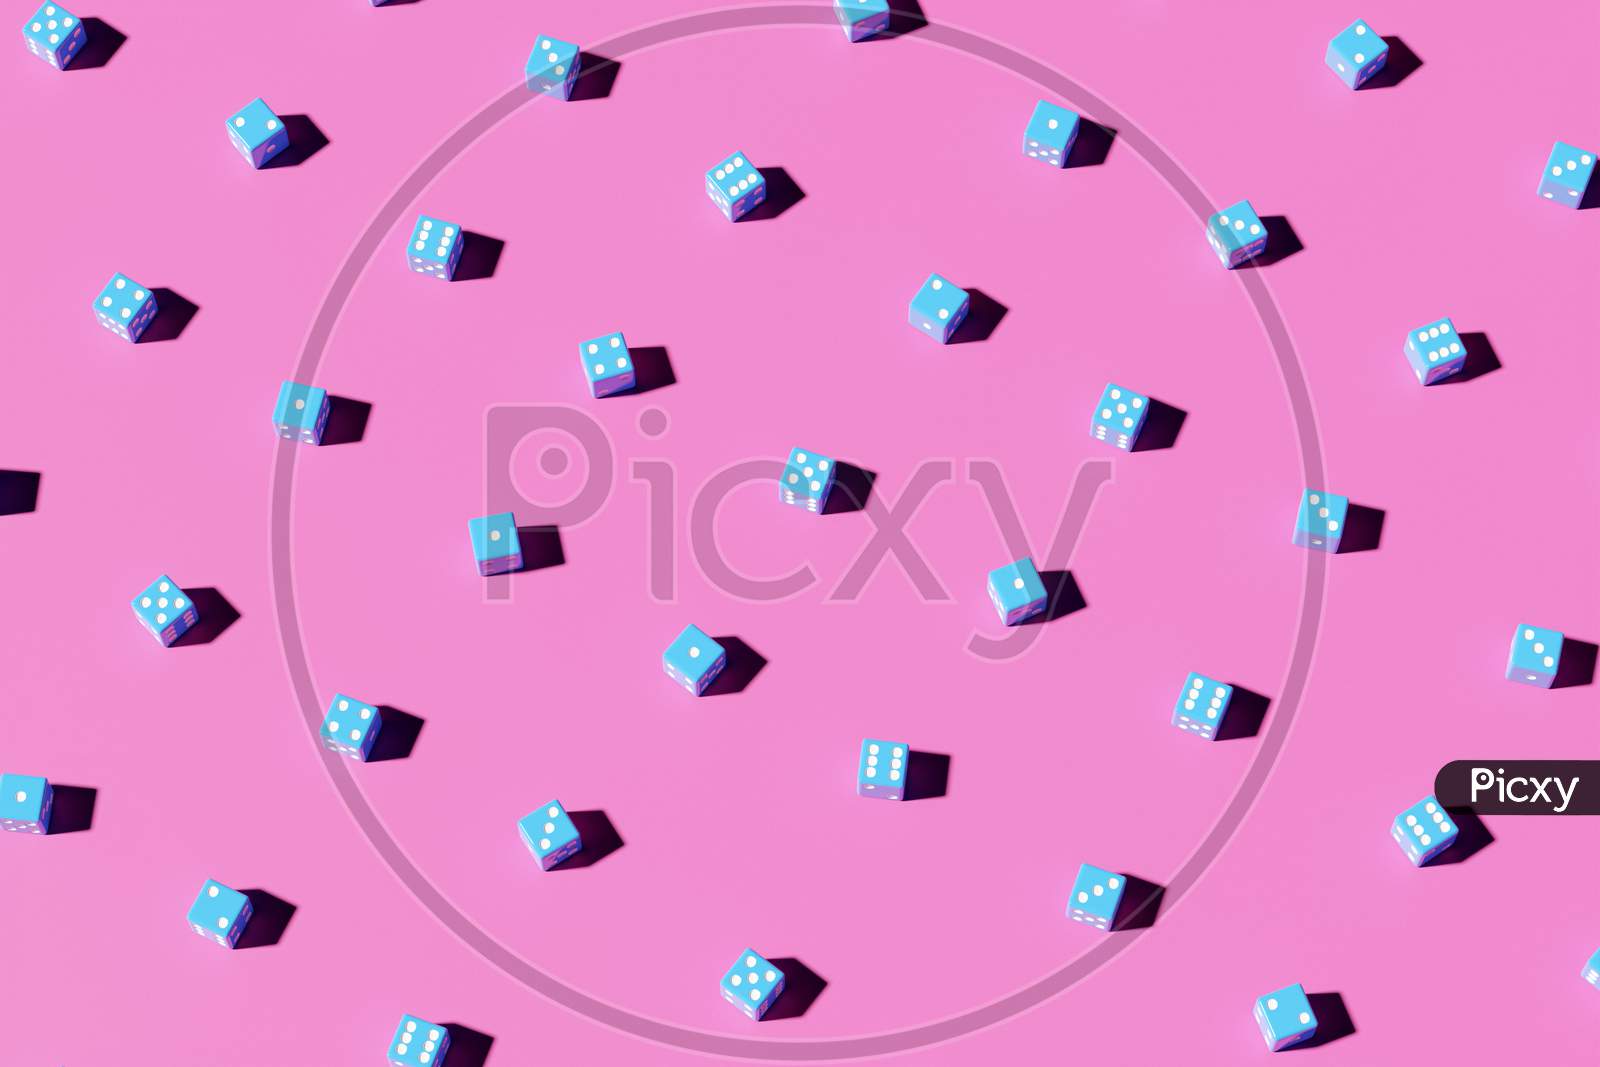 3D Illustration Set Of Game Dice, Isolated On Pink Background. Dice Design From One To Six.